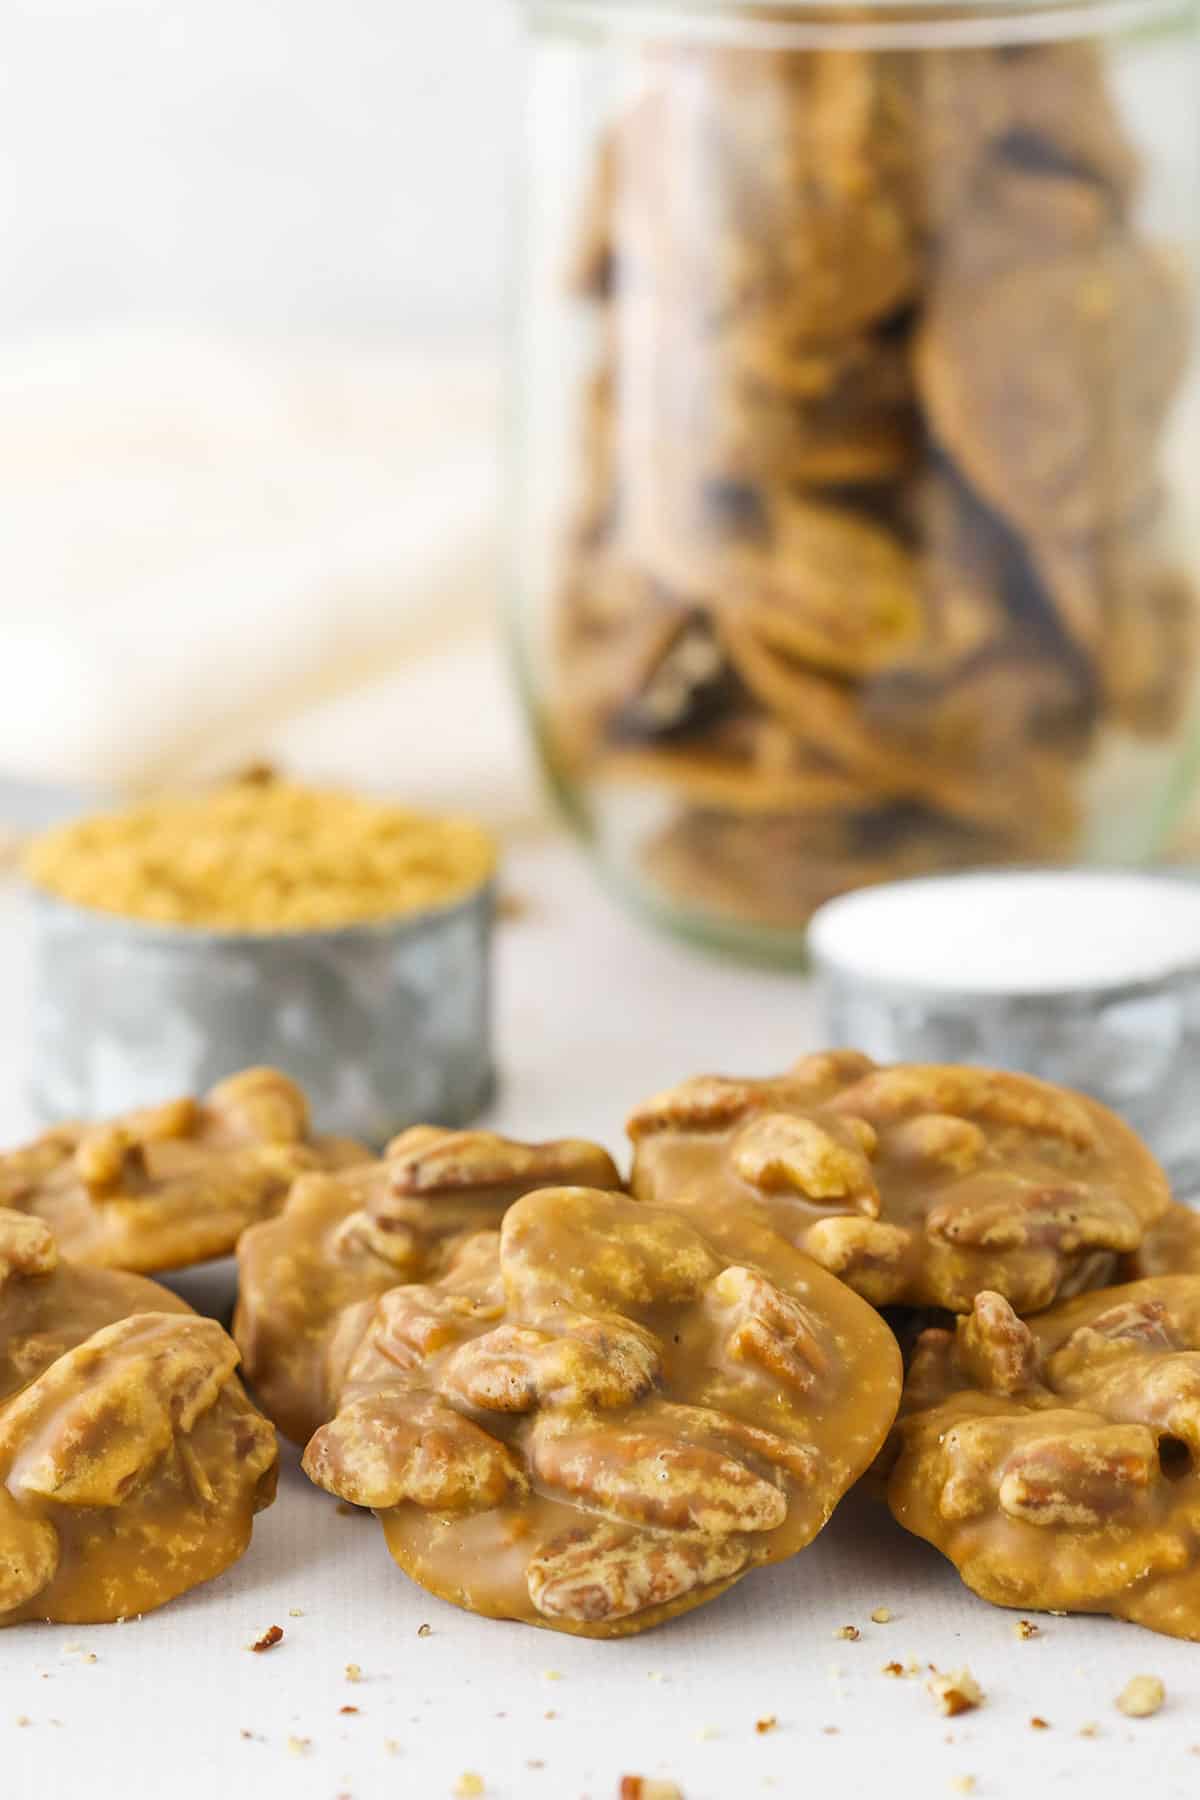 Six Southern Pecan Pralines on a white table with brown sugar and a jar of more Southern Pecan Pralines in the background